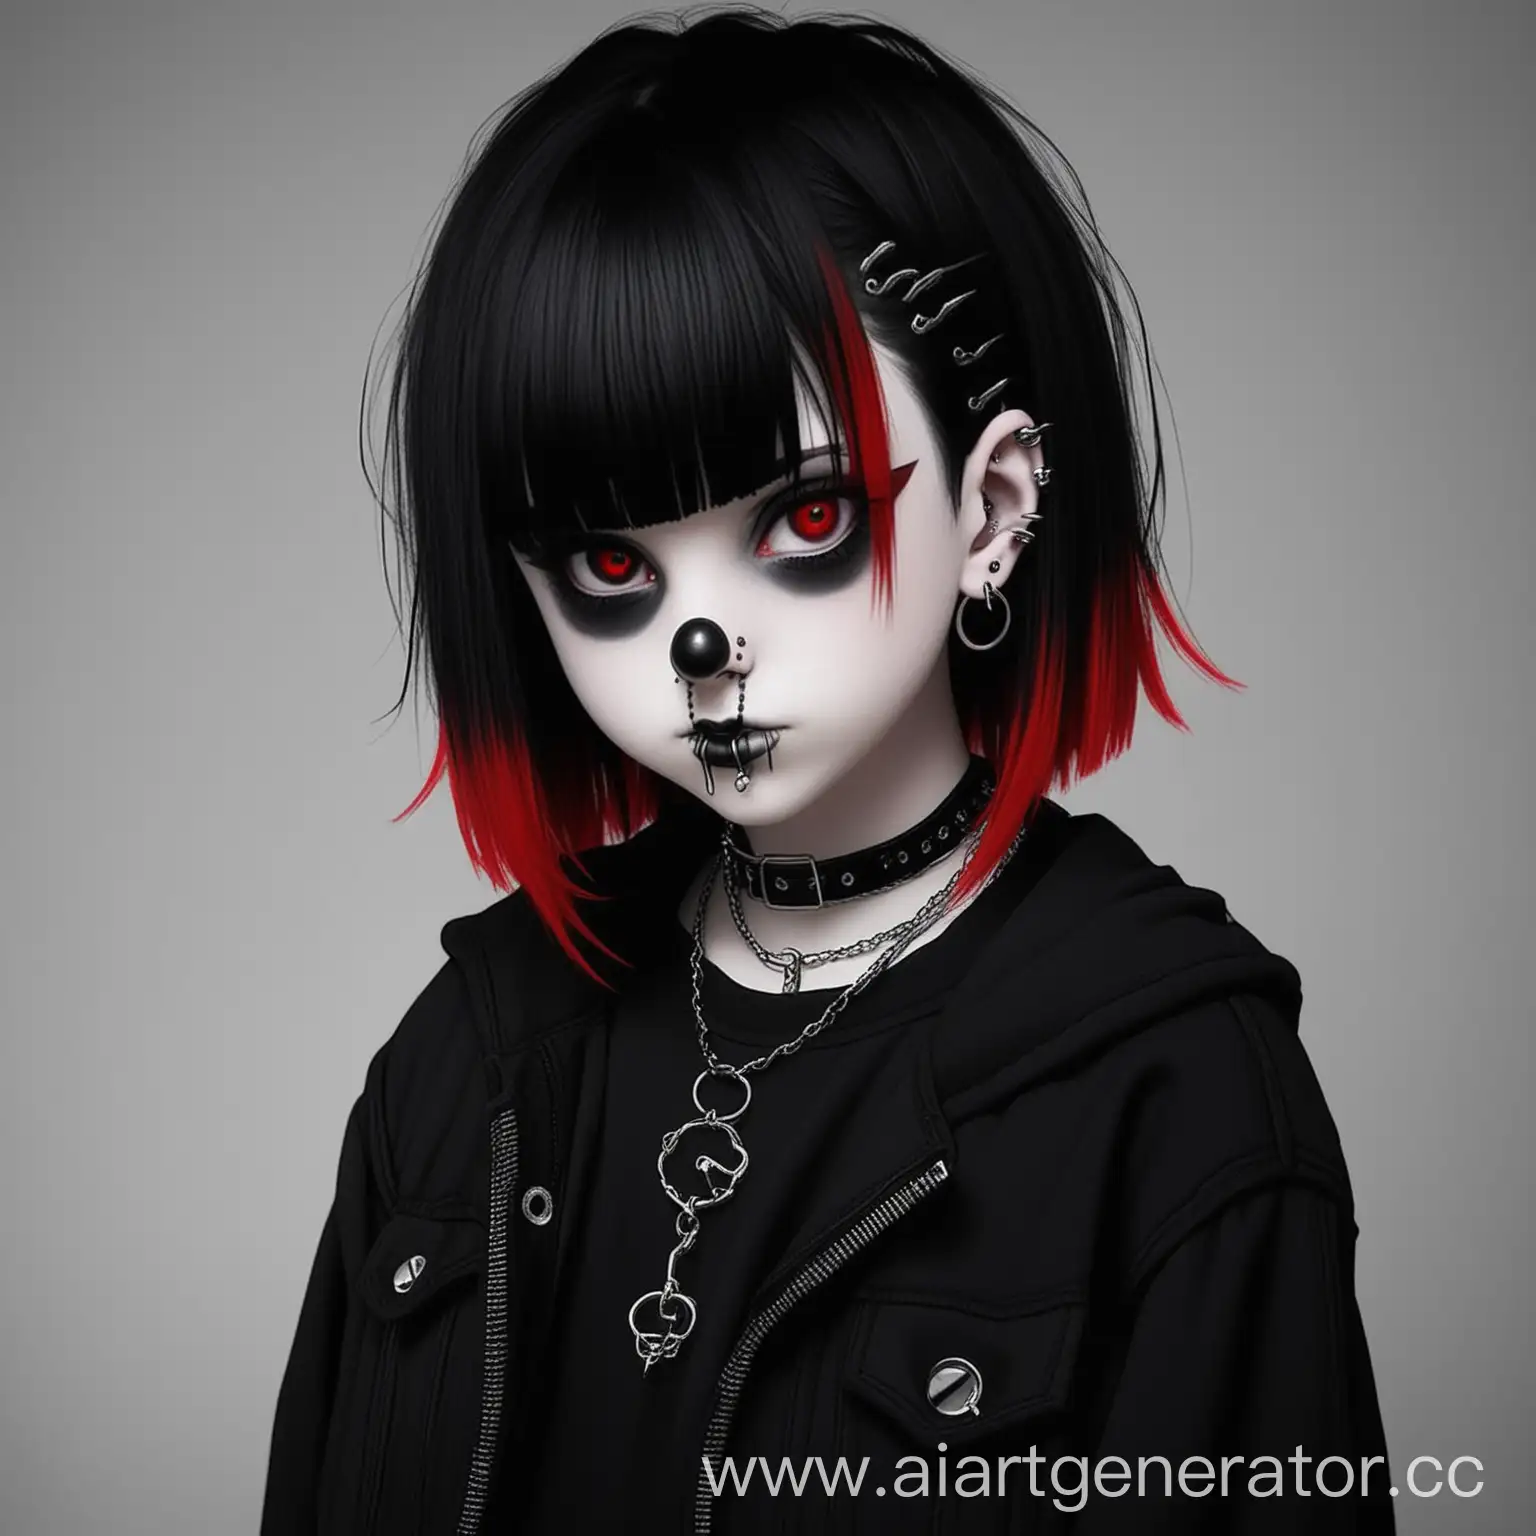 teenage goth girl with short black hair and bangs dyed red with a piercing in the nose and black eye shadow